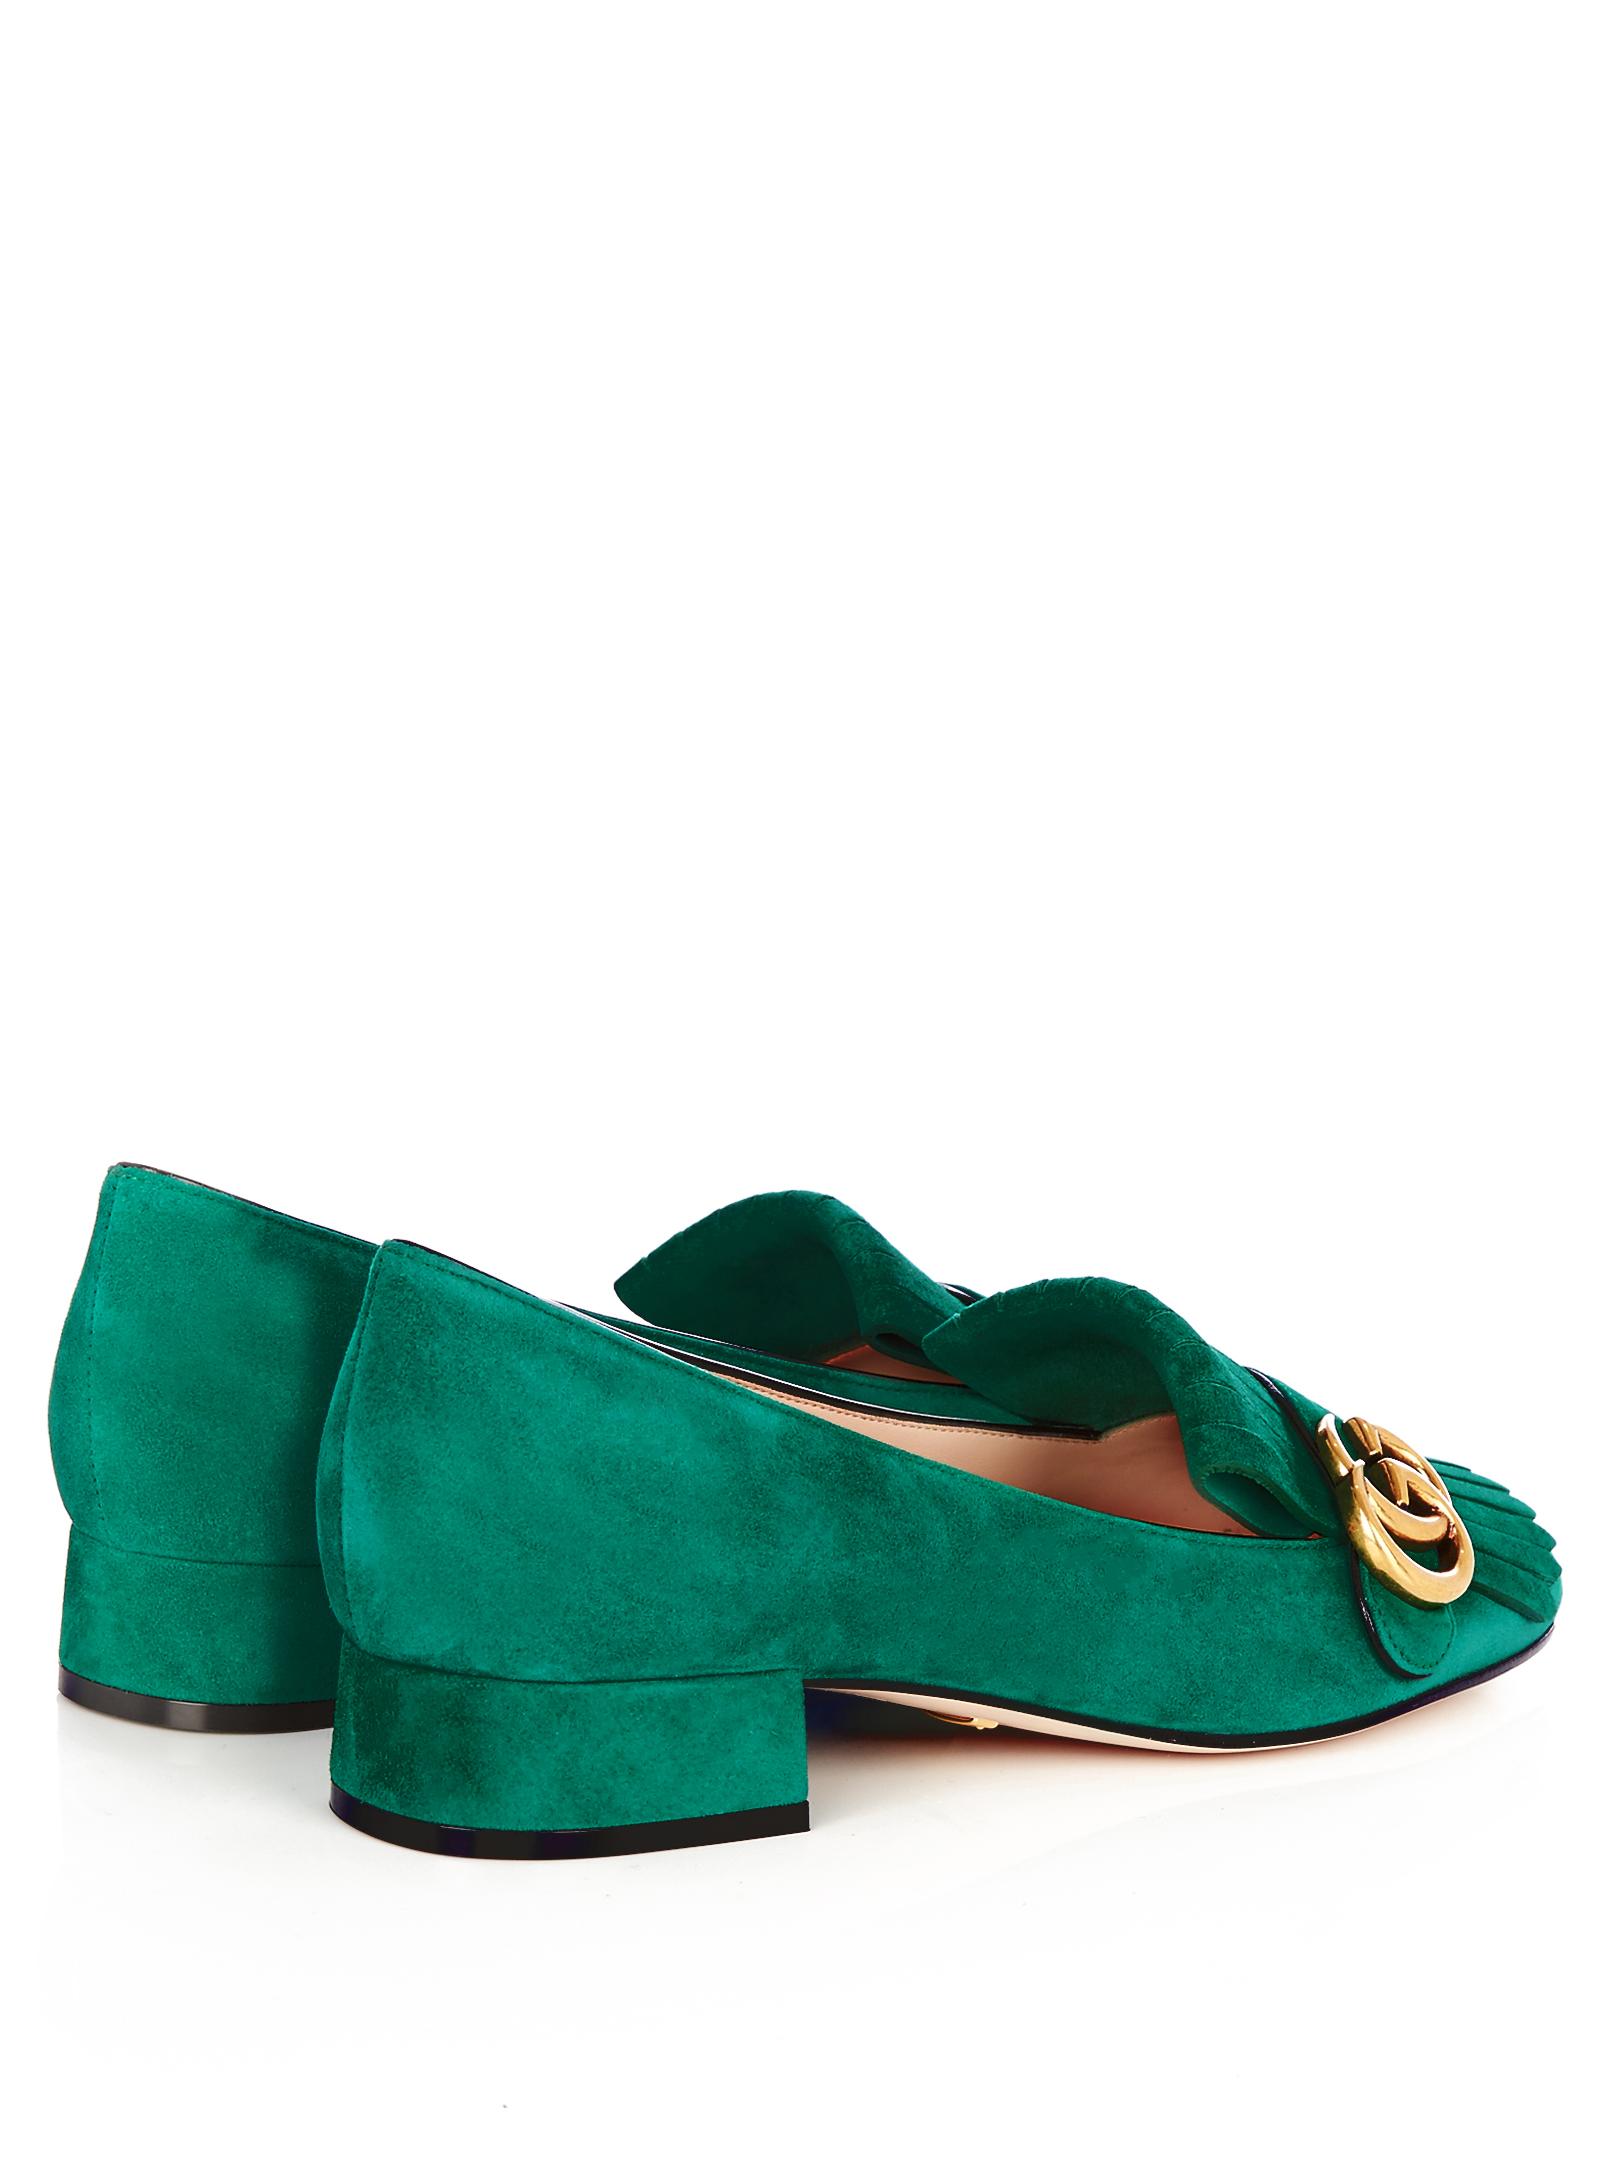 Gucci Marmont Fringed Suede Loafers in Green | Lyst